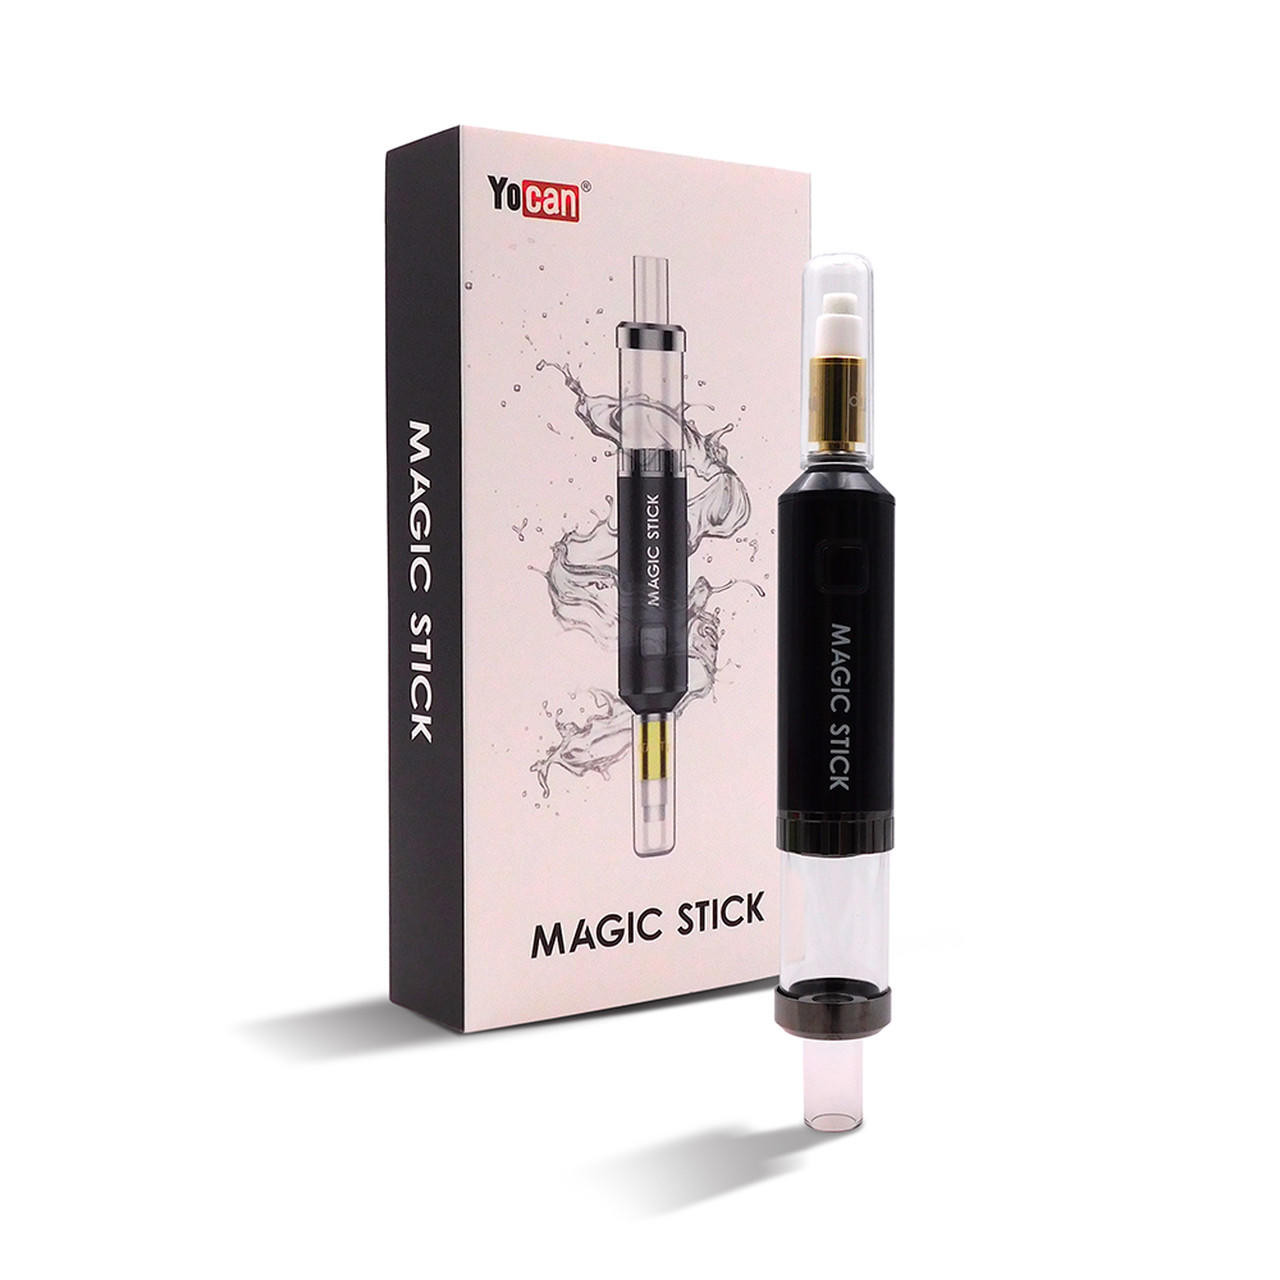 The One Nectar Collector and Wax Vape Kit by Yocan